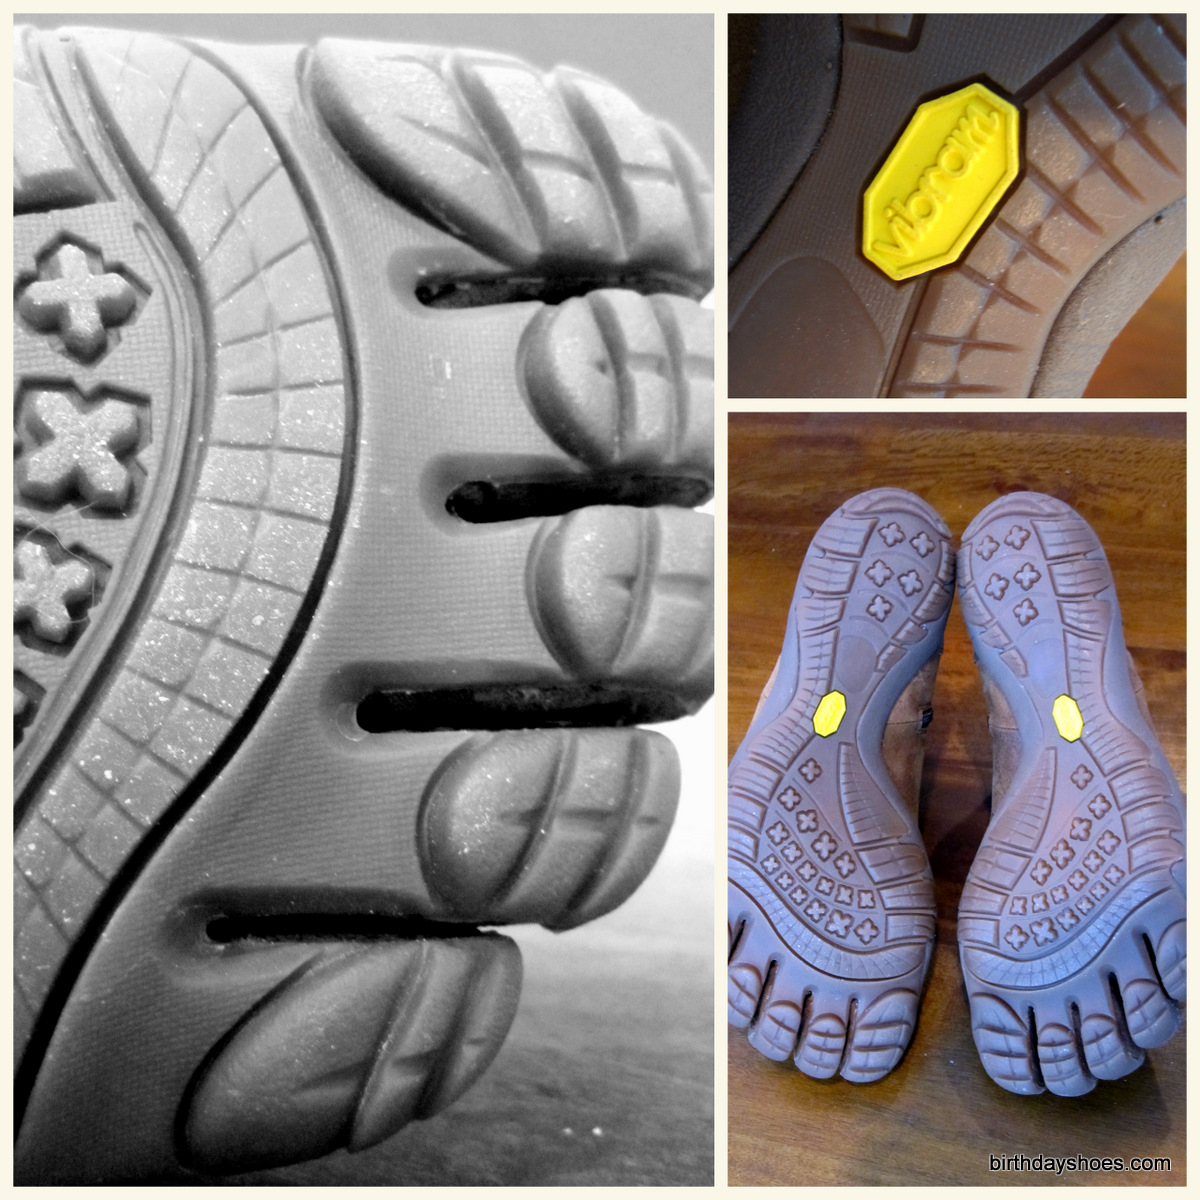 The FiveFingers Bormio features the Vibram Trek rubber sole, which has recently turned 